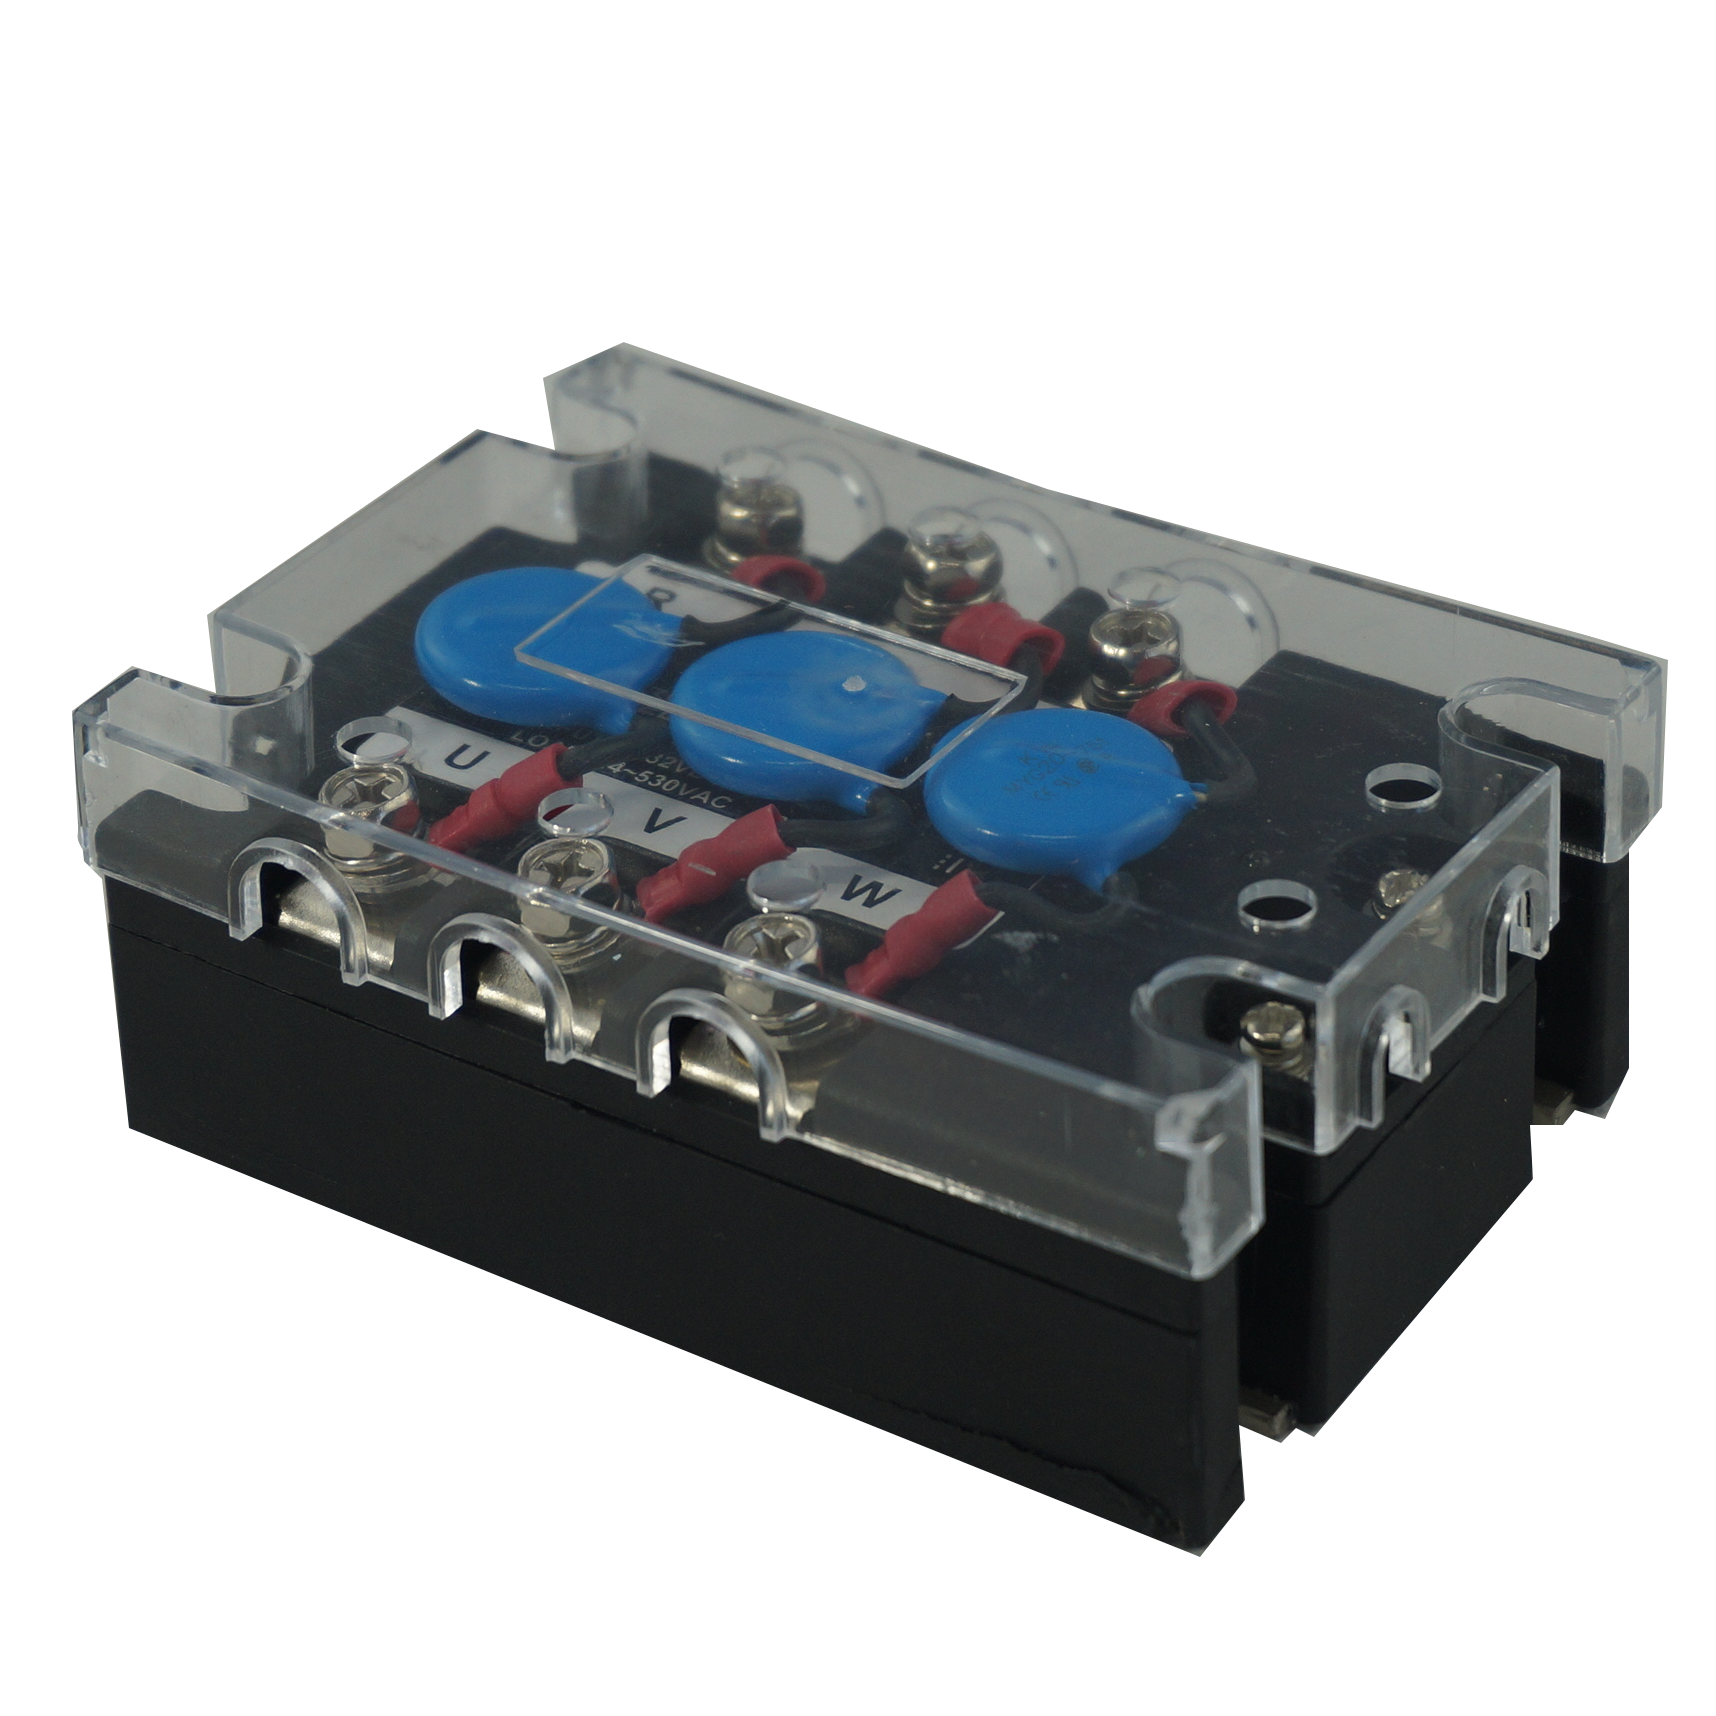 FTH12053ZA4-P, Solid State Relay, 3 Phase 90-280VAC Control, 120A, 70-530VAC Load w/ Varistors, with IP20 Cover